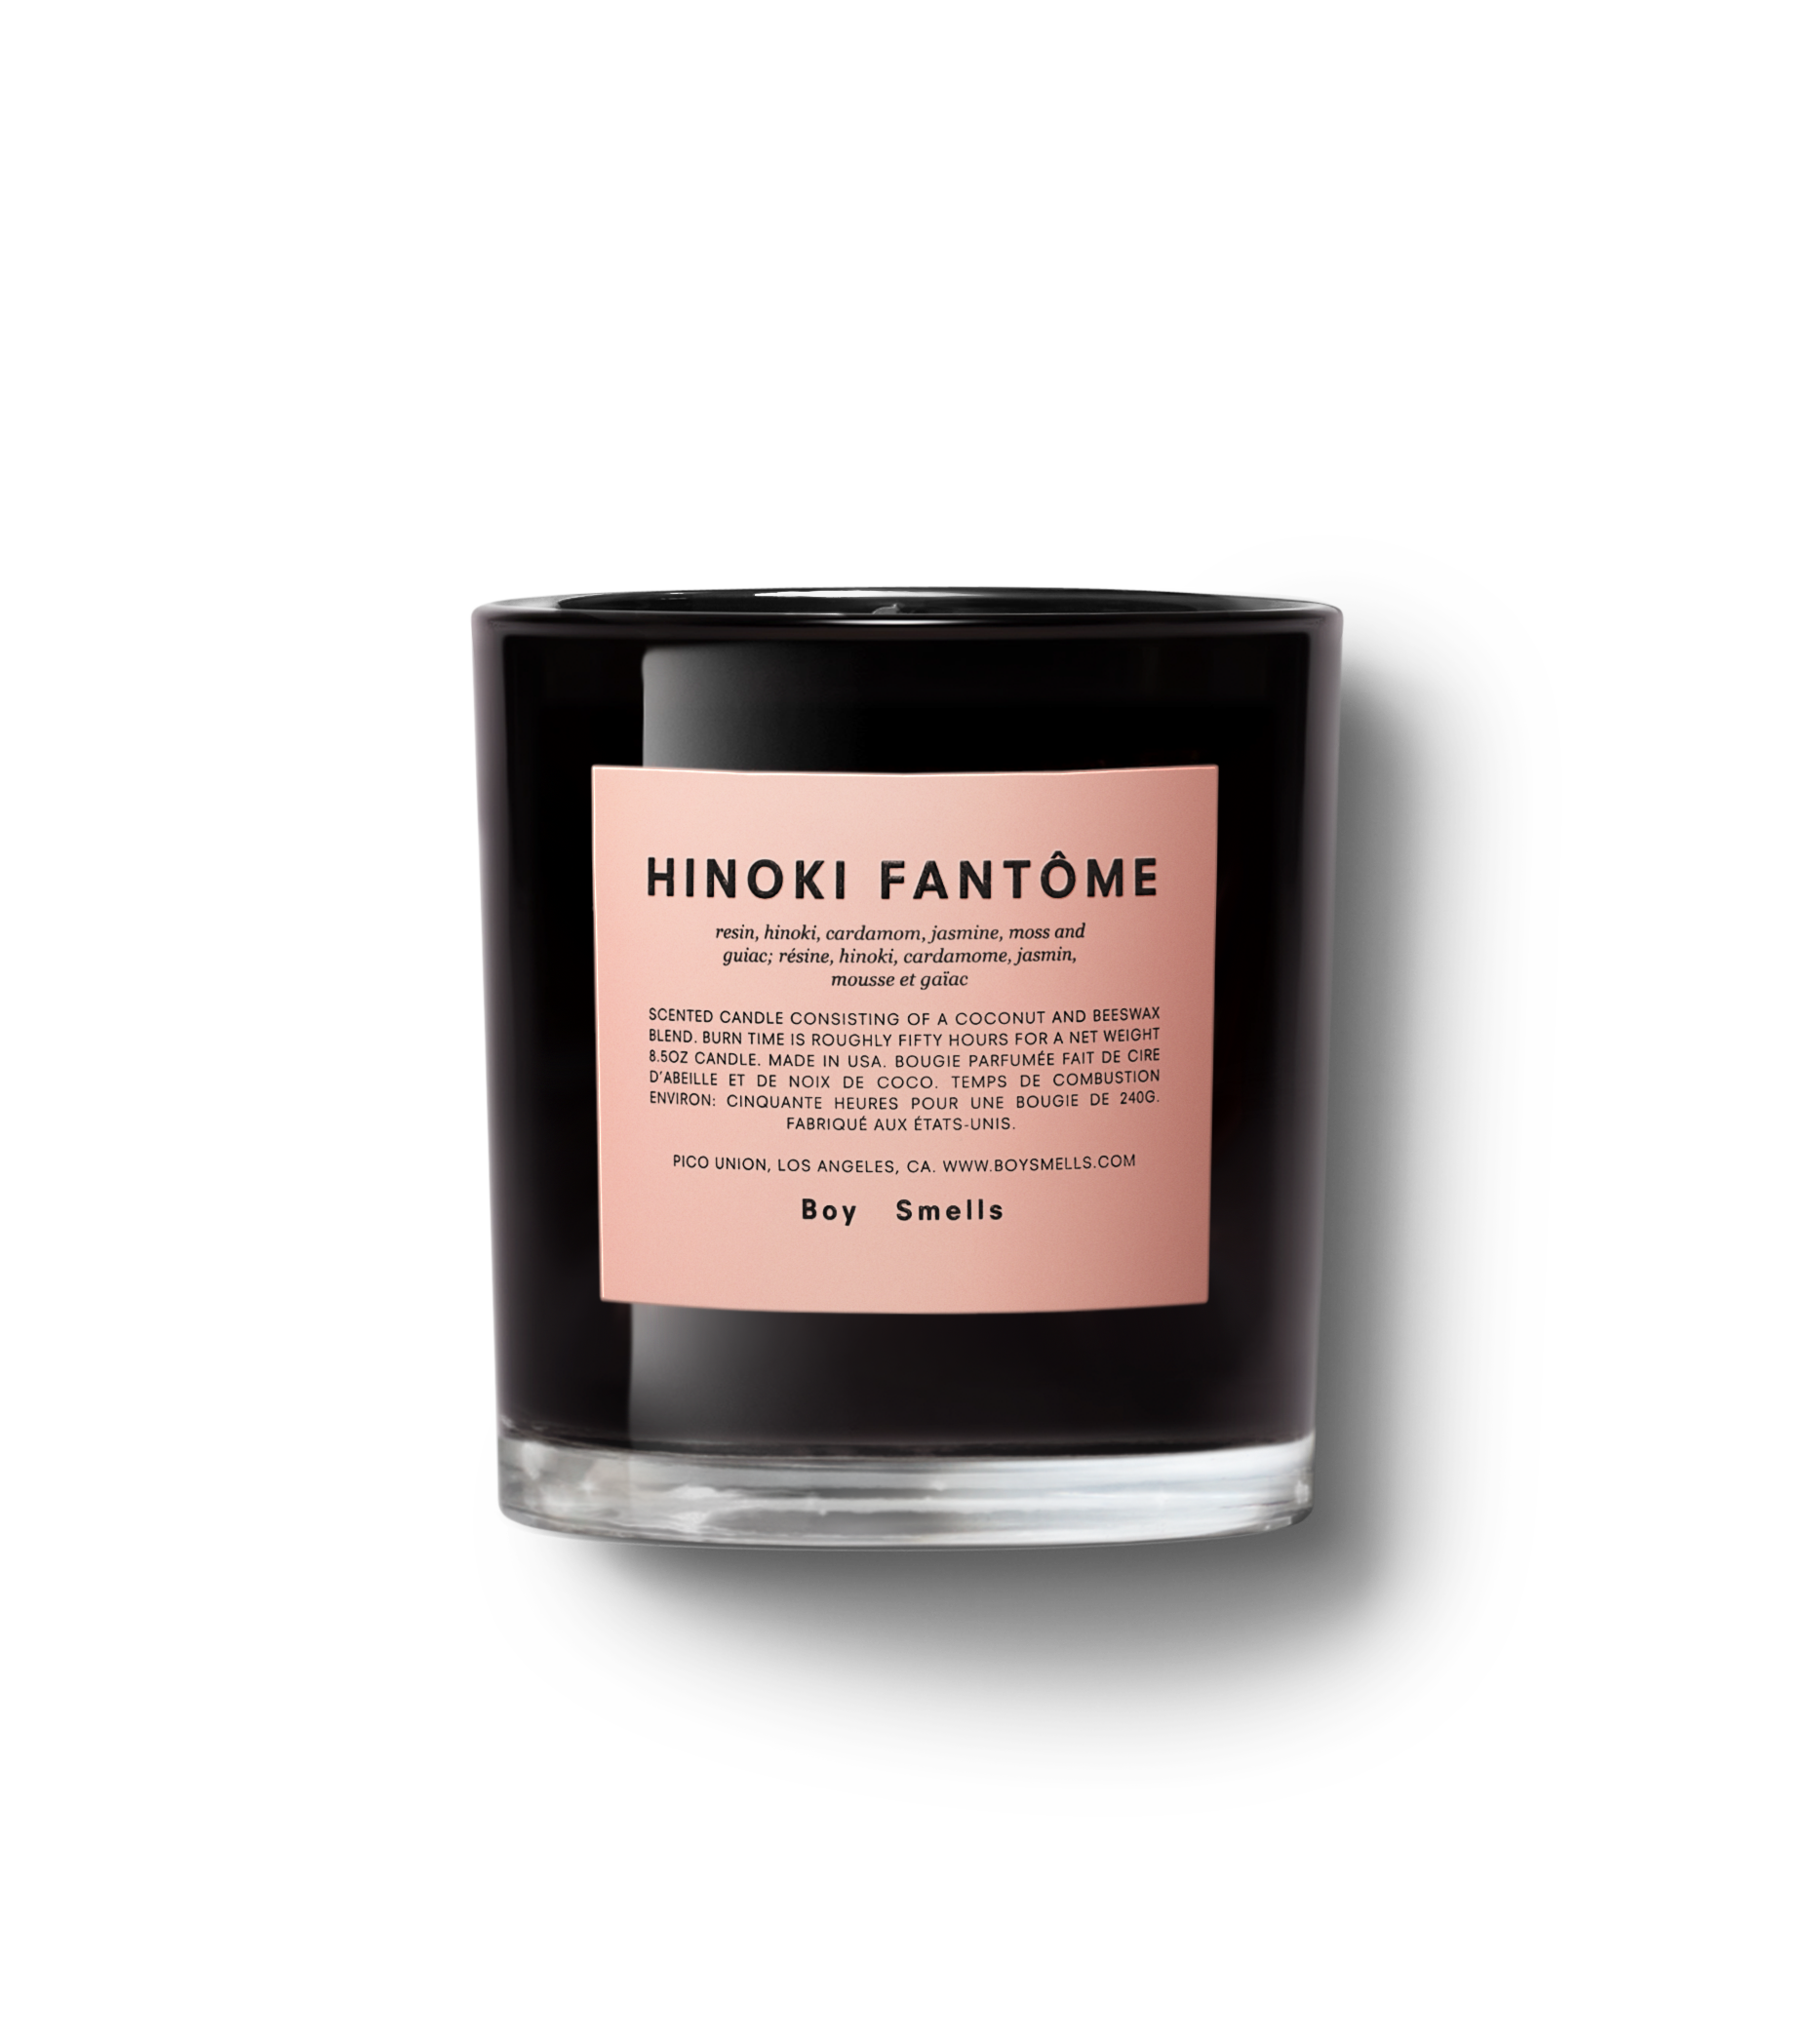 Hinoki Fantôme: Coconut & Beeswax Scented Candles | Boy Smells